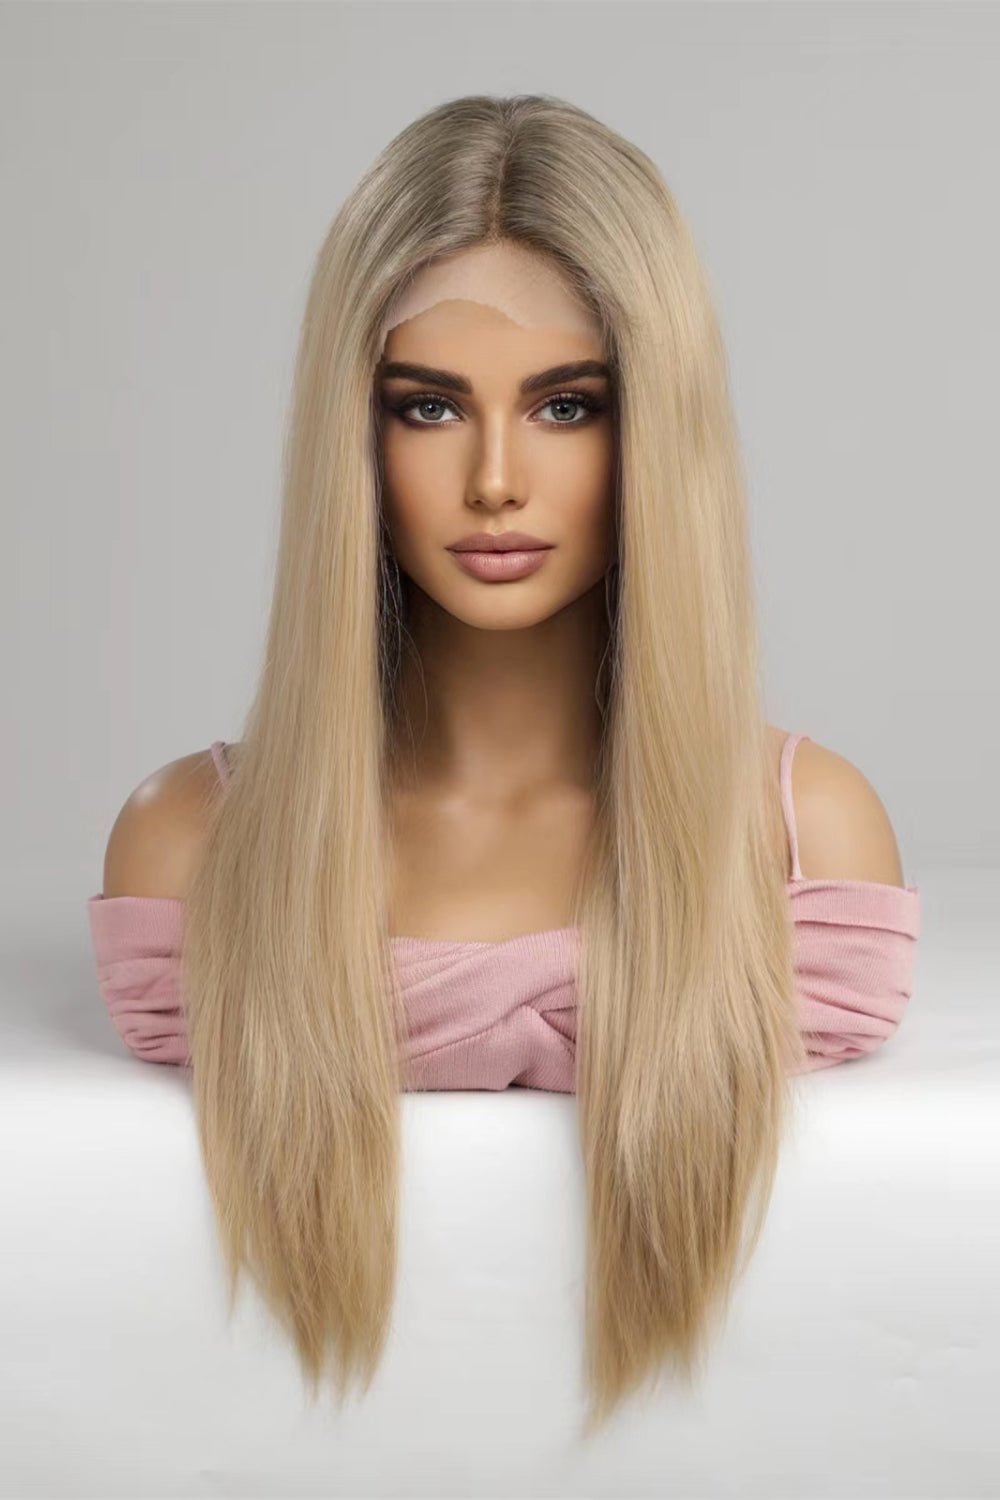 13*2" Lace Front Wigs Synthetic Long Straight 24'' 150% Density - PINKCOLADA-Beauty-100100622155887